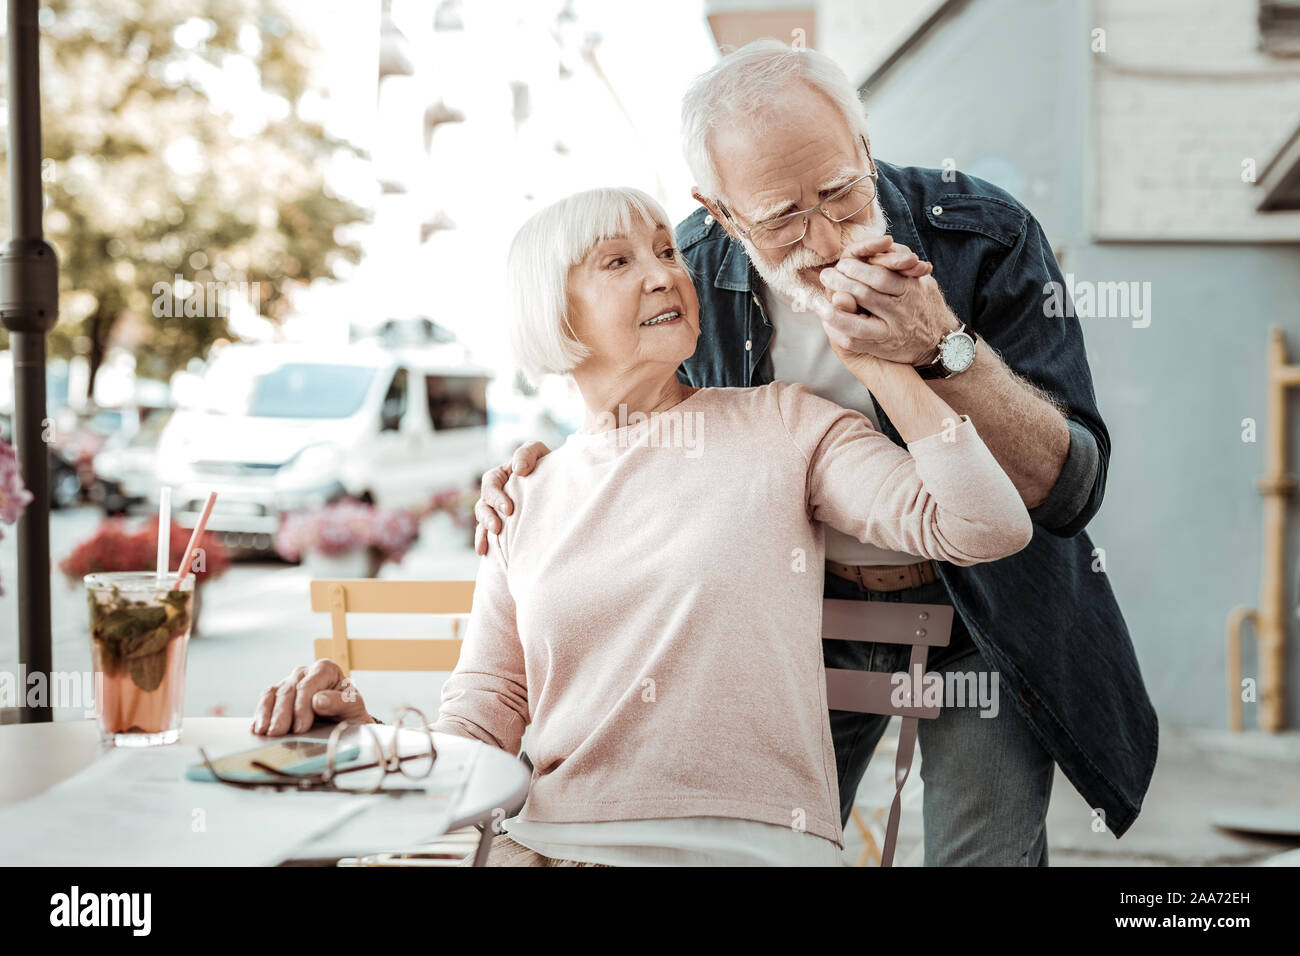 Nice aged man kissing his wifes hand Stock Photo